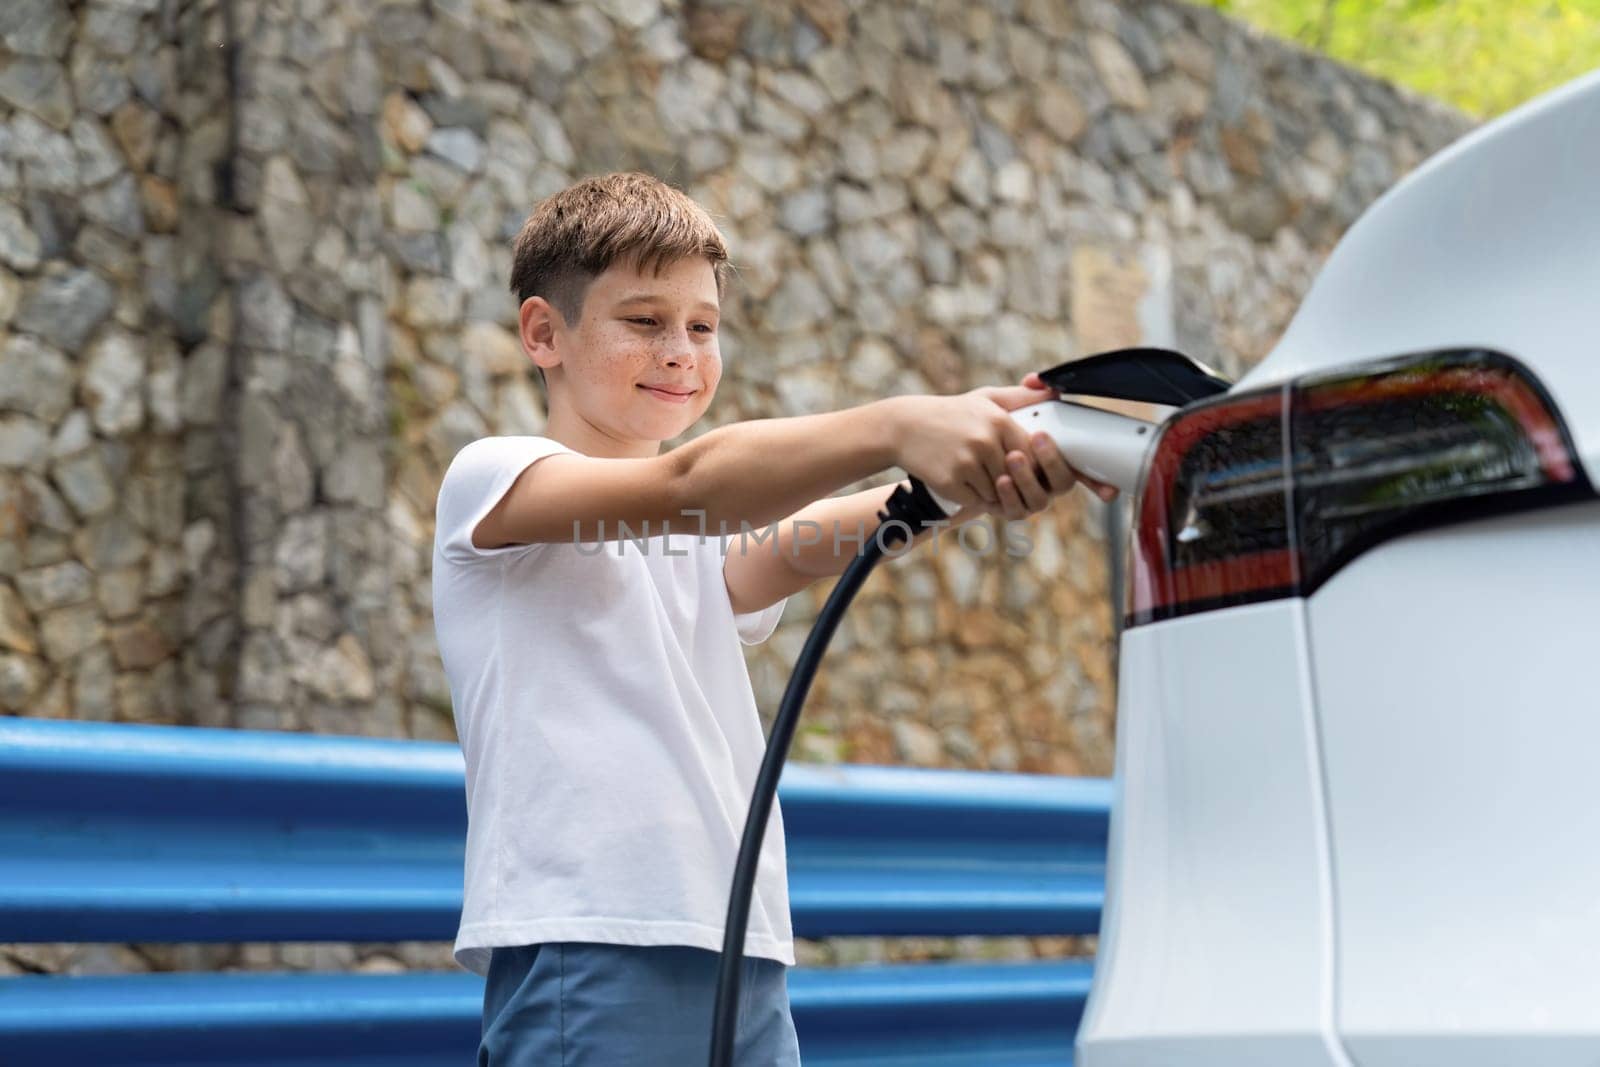 Little boy recharging eco-friendly electric car from EV charging station. EV car road trip travel concept for alternative transportation powered by clean renewable and sustainable energy. Perpetual